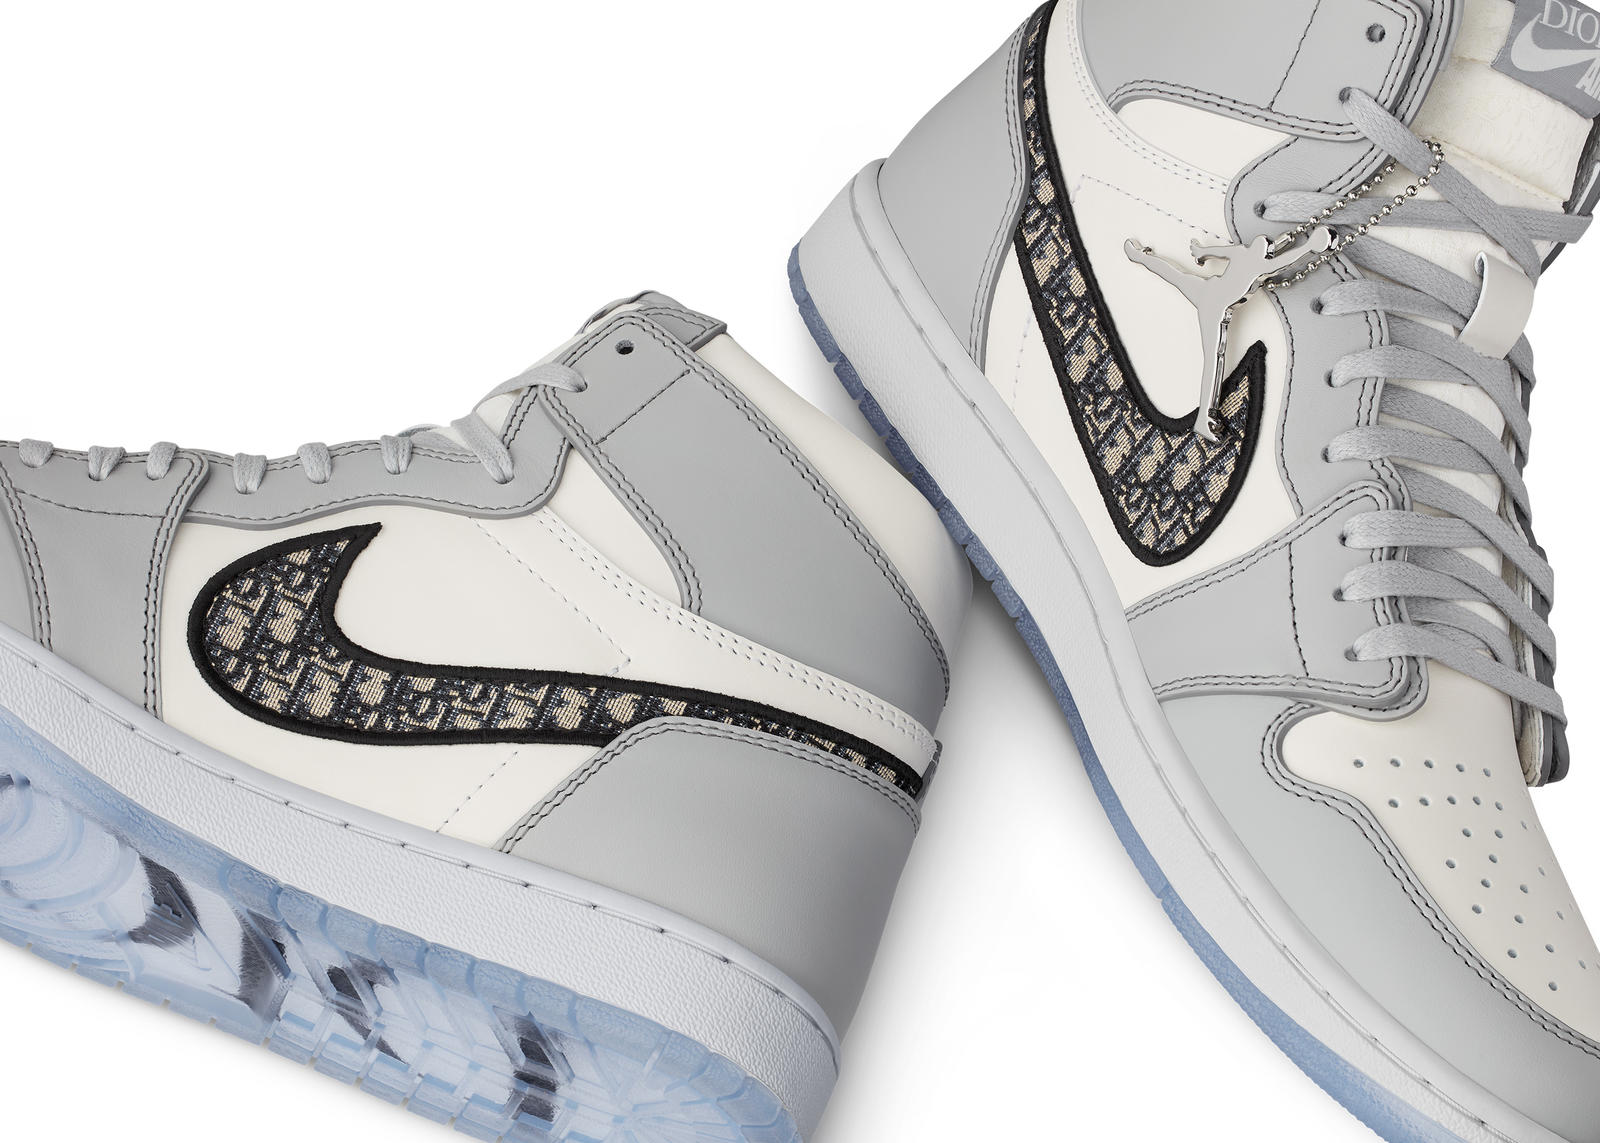 Why the Nike x Dior Air Jordan 1s are at the top of our wishlist